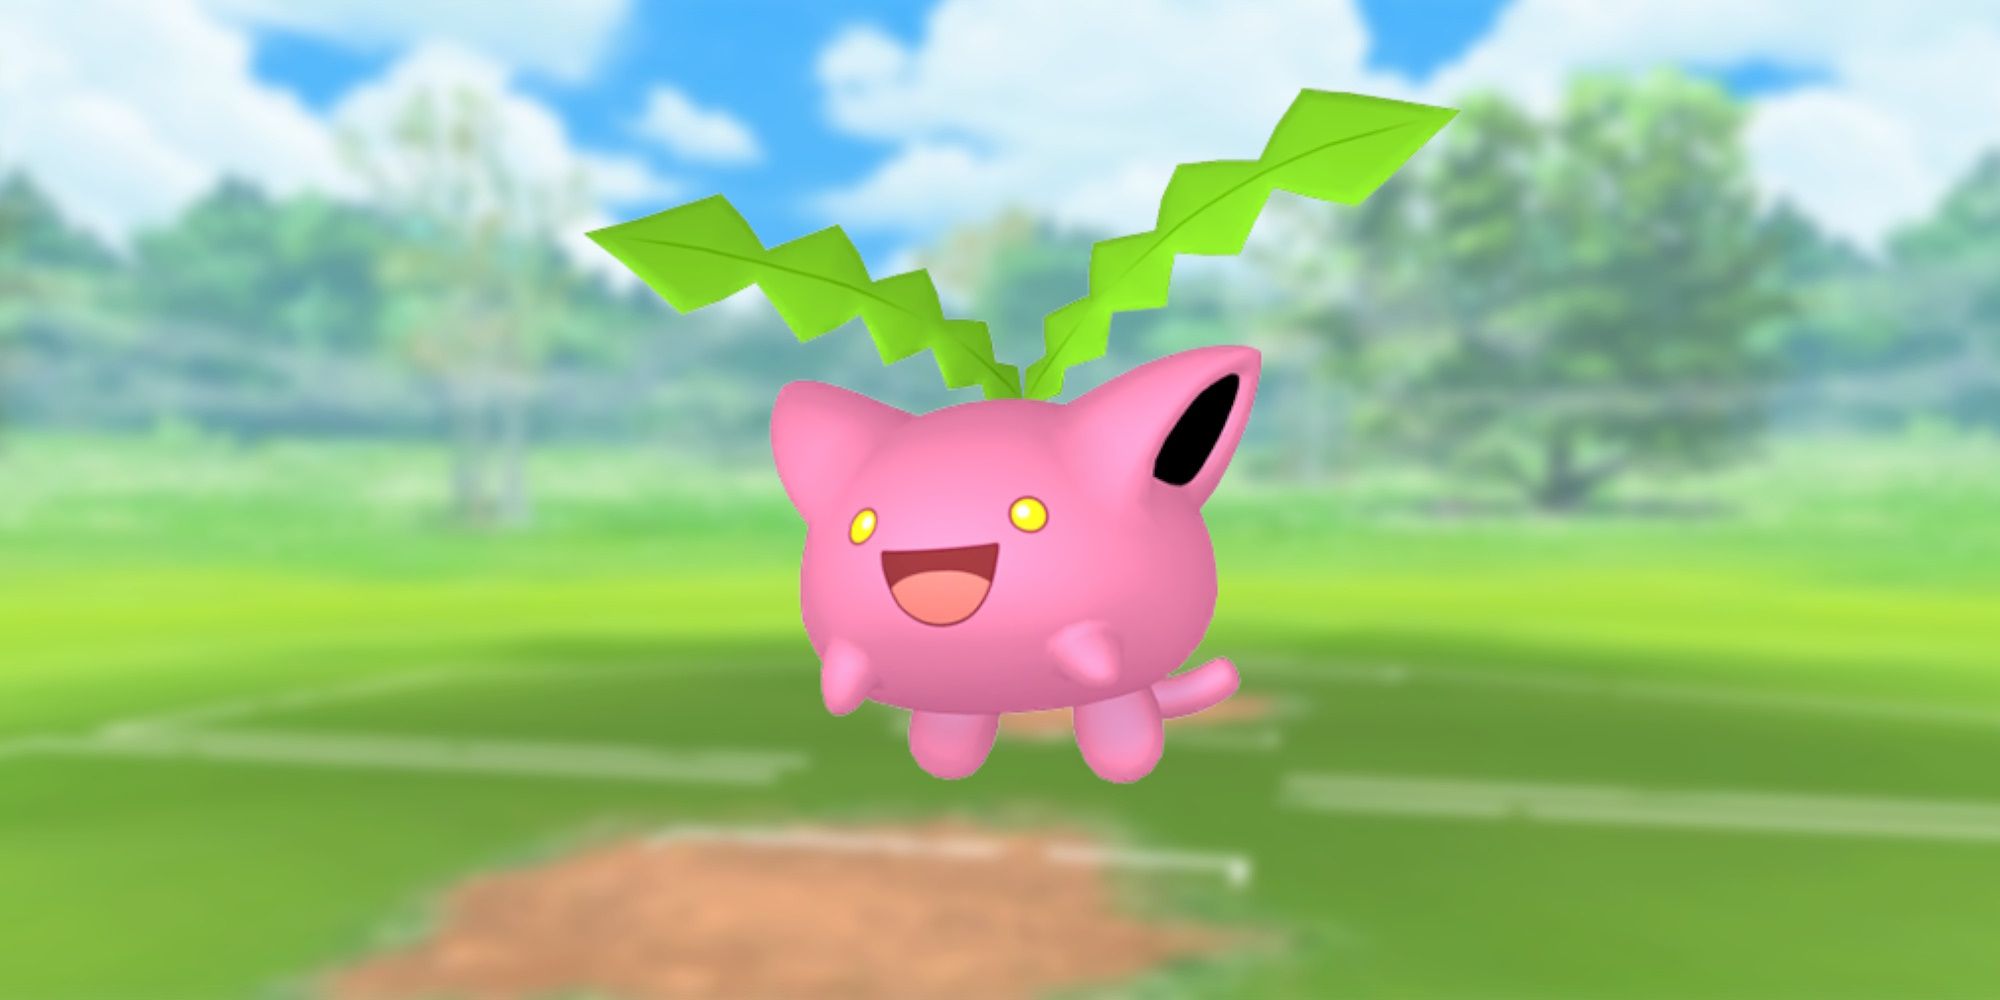 Image of Hoppip from Pokemon with the Pokemon Go battlefield as the background